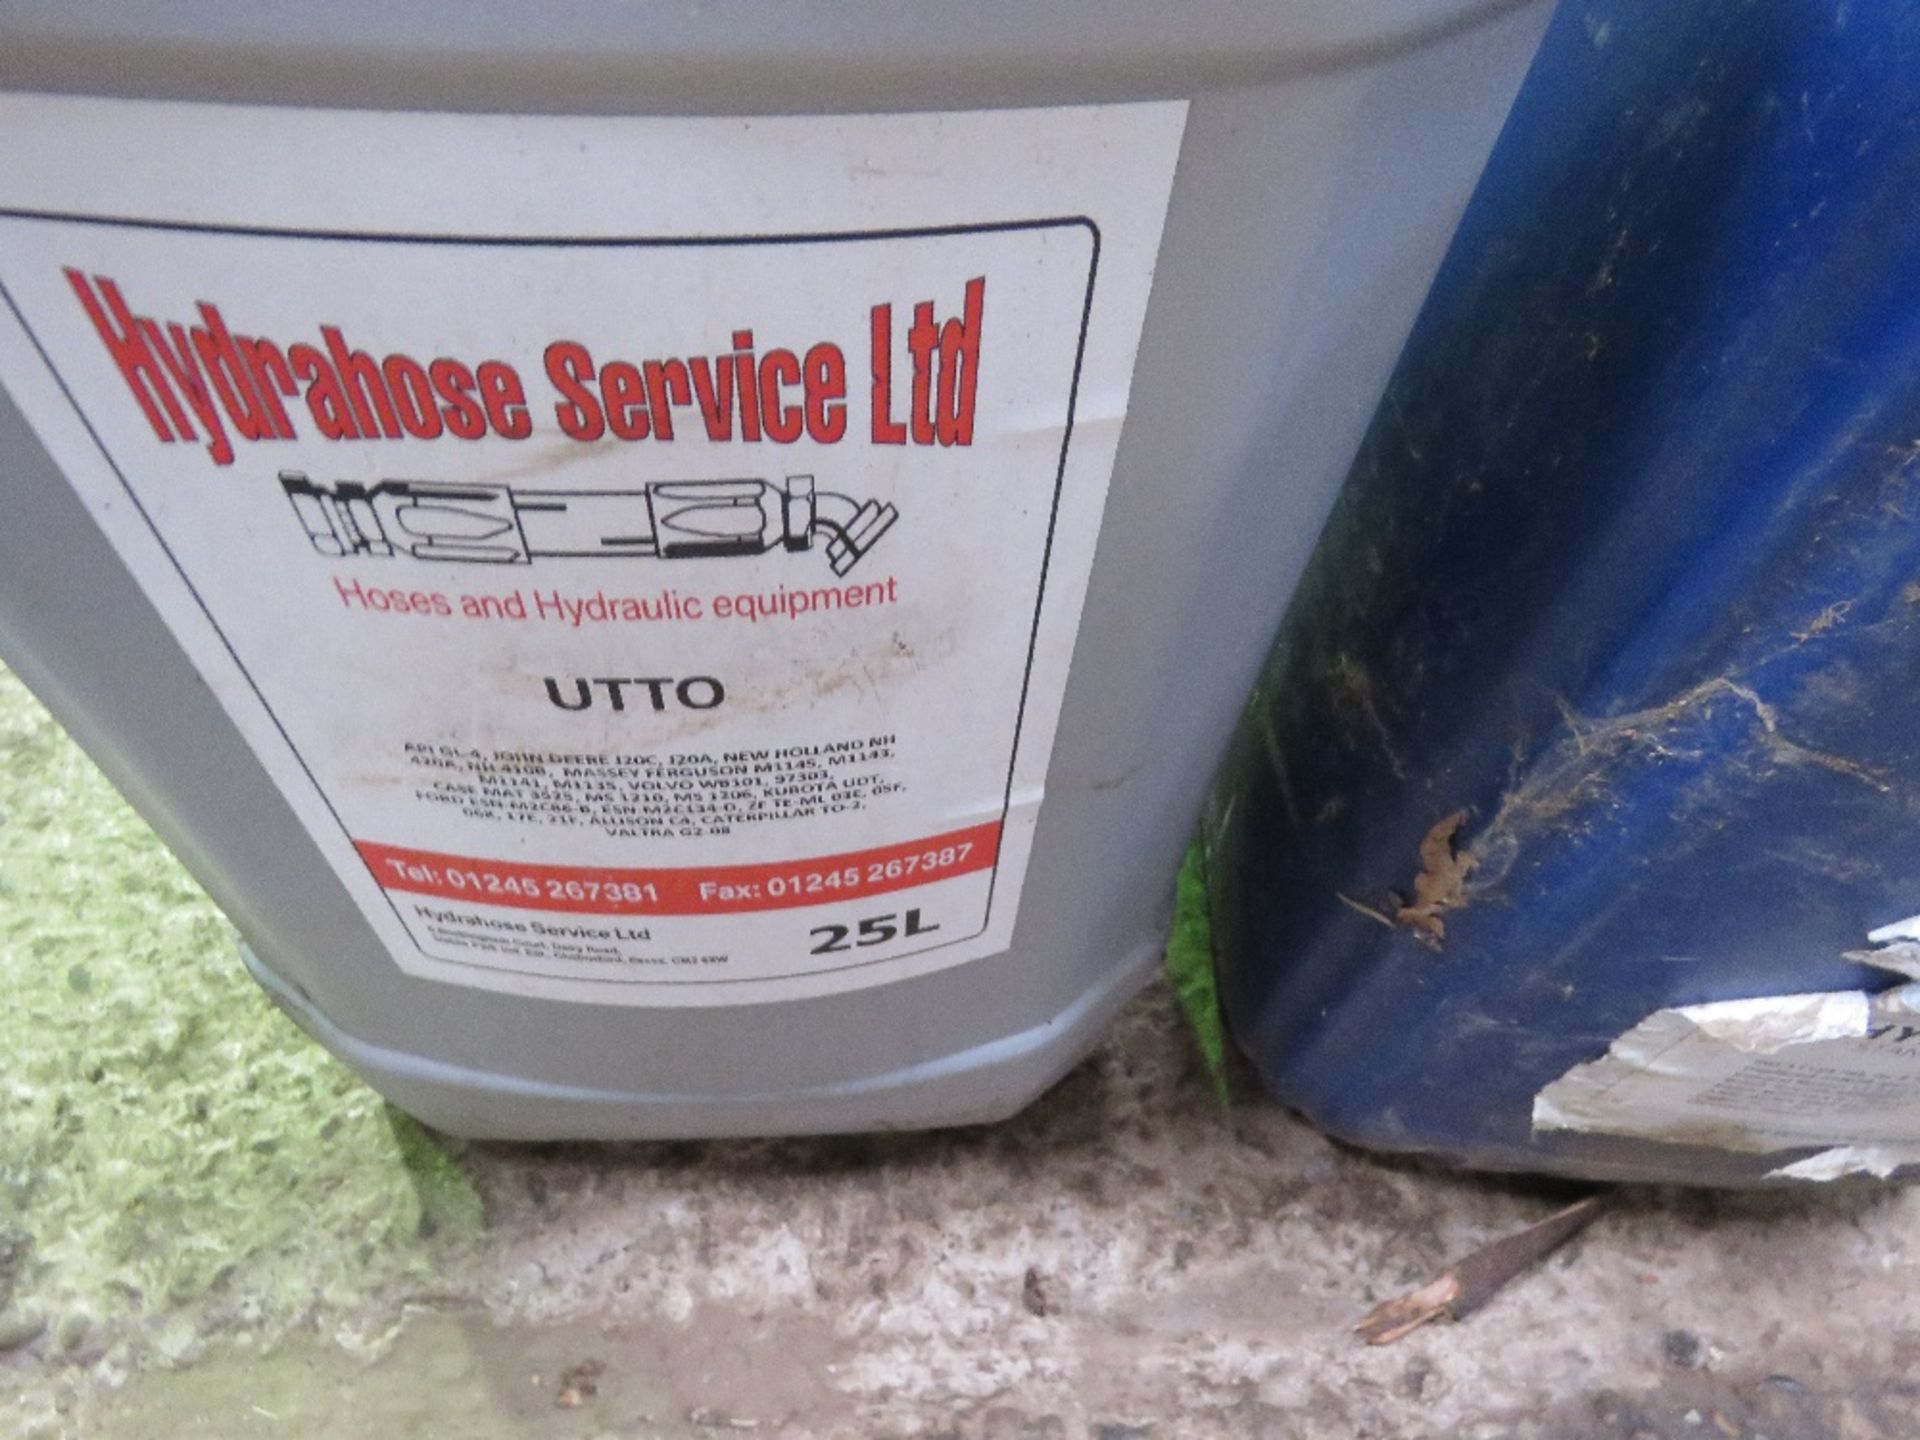 2 X DRUMS OF HYDRAULIC OIL, FEEL NEARLY FULL. DIRECT FROM LOCAL LANDSCAPE COMPANY WHO ARE CLOSING A - Image 2 of 3